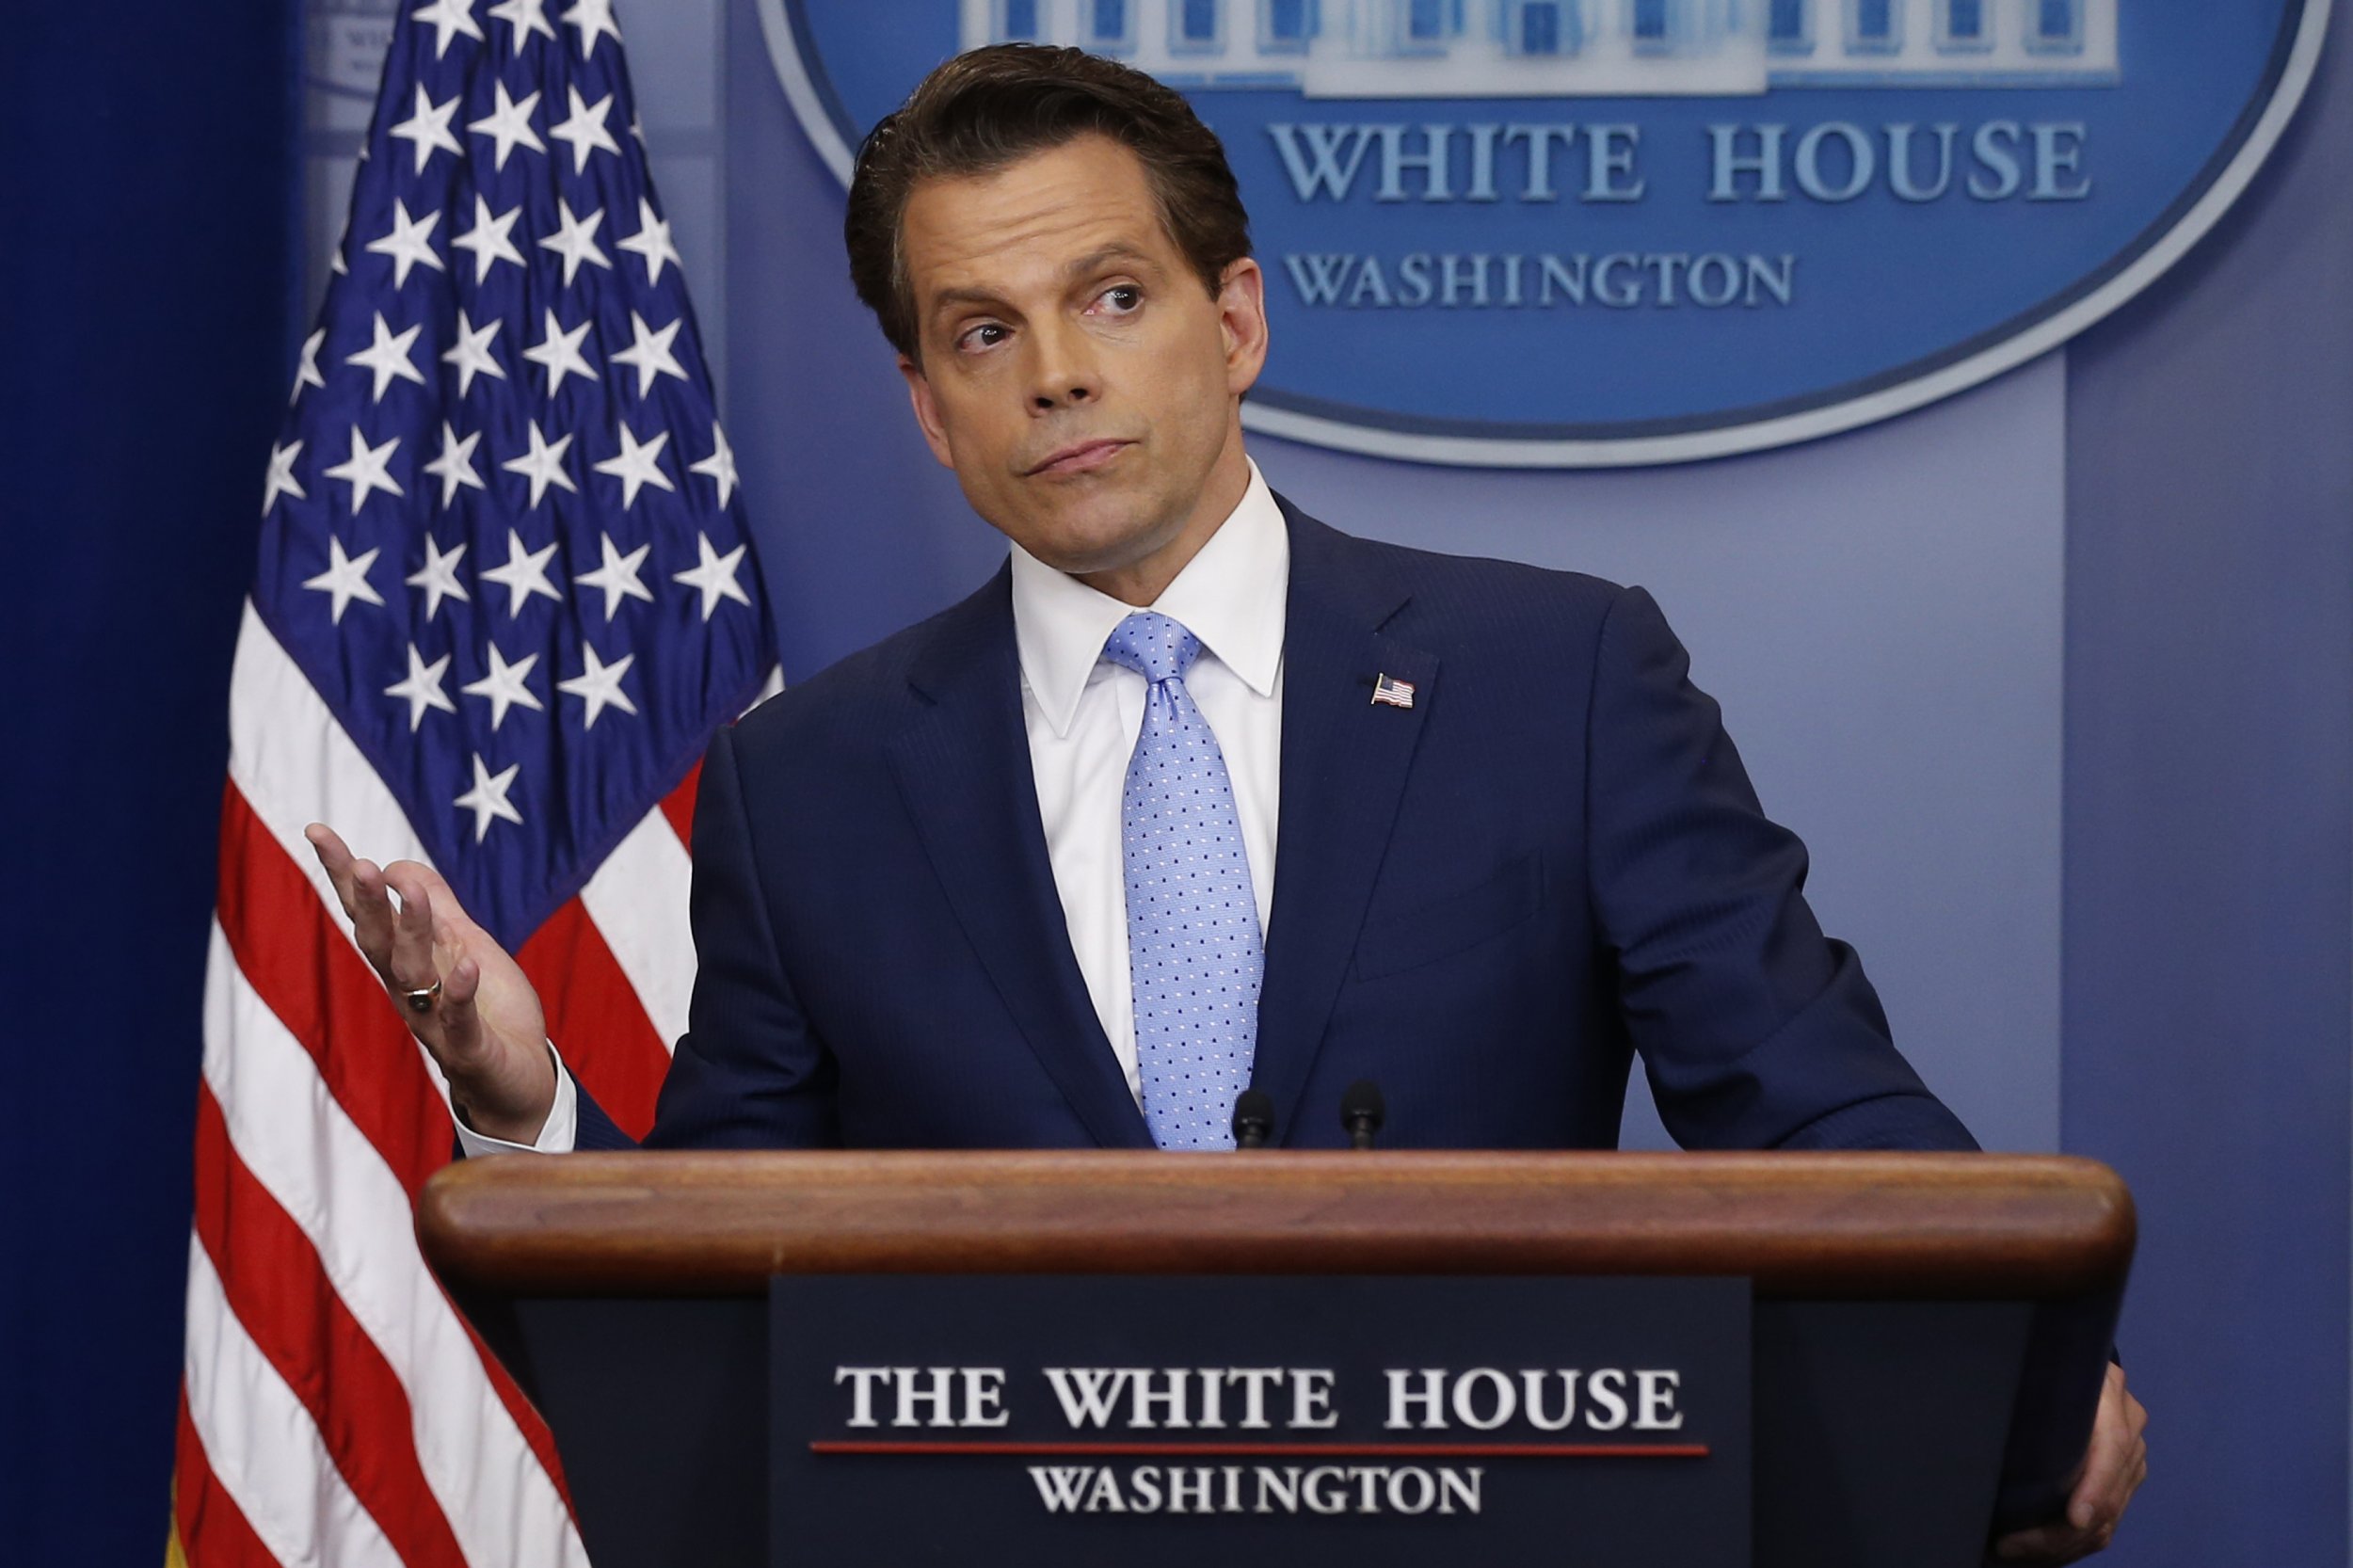 New White House Communications Director Anthony Scaramucci